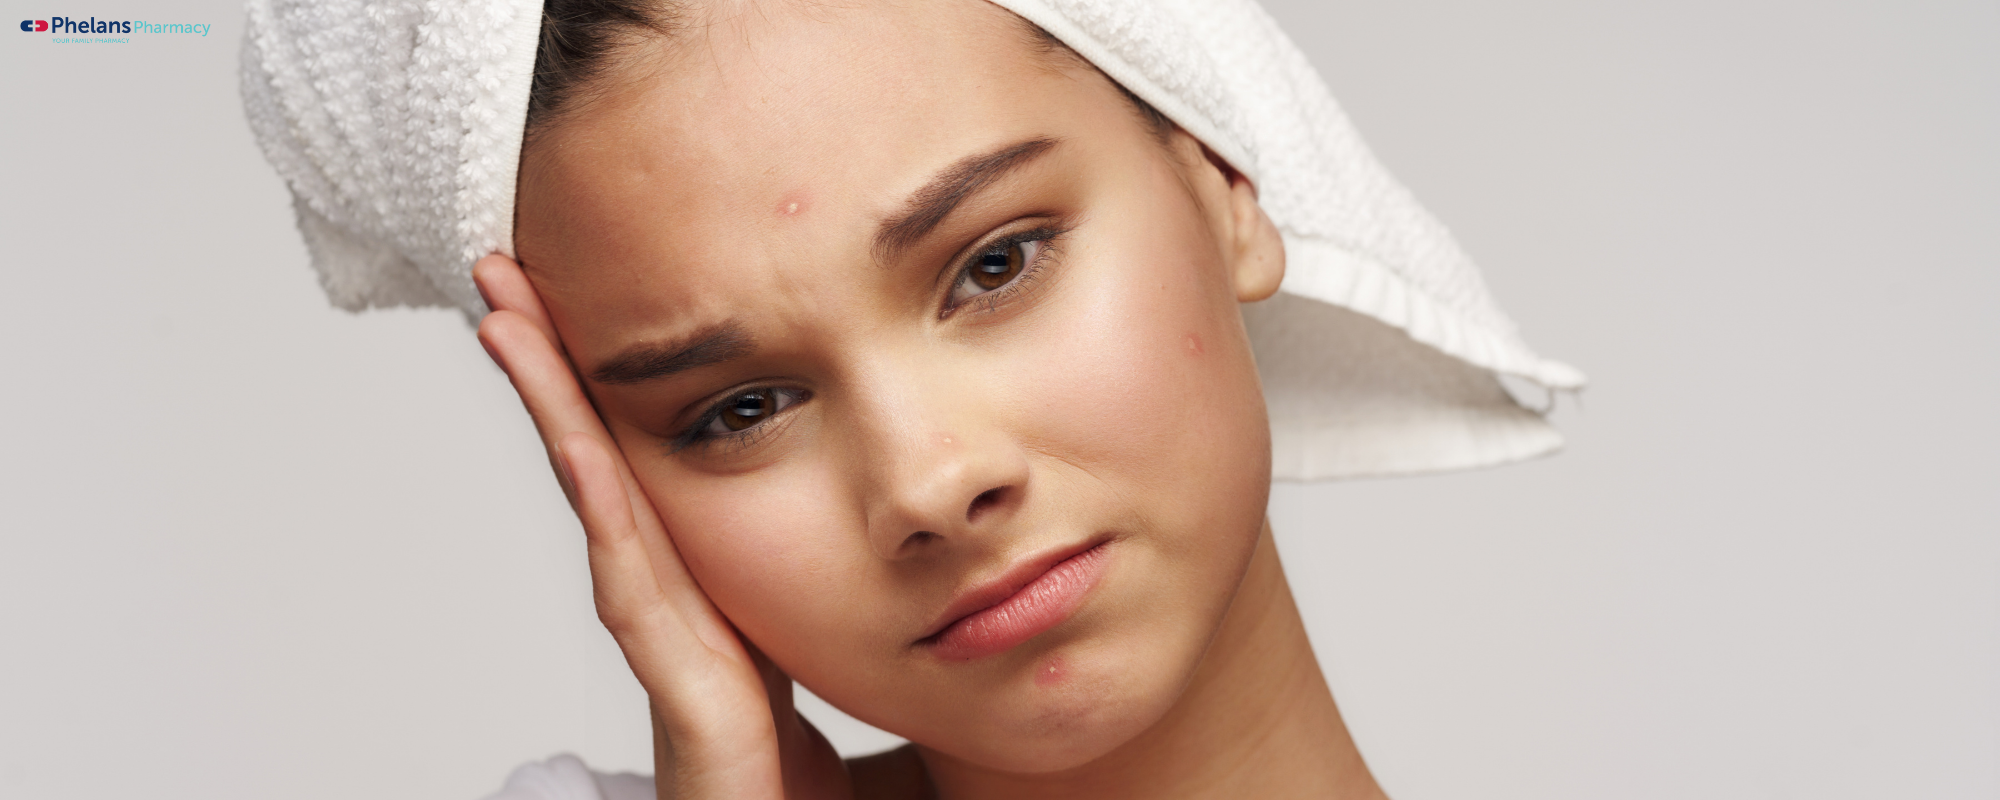 Top Tips For Acne Prone Skin